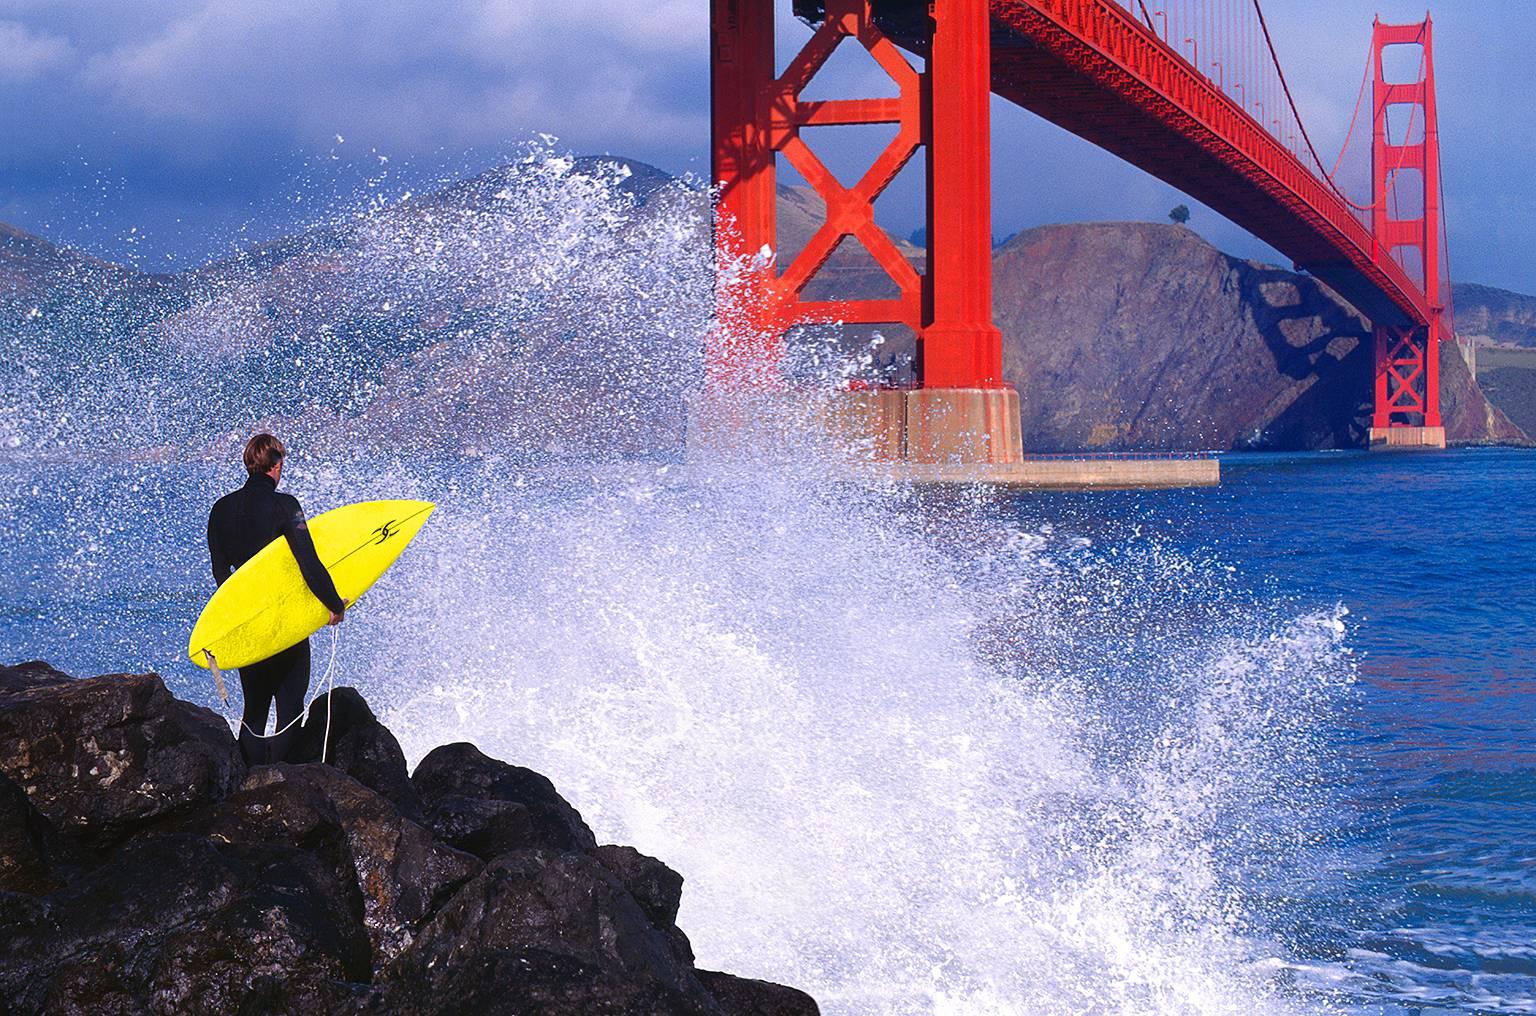 Mitchell Funk Color Photograph - Surfer at Golden Gate